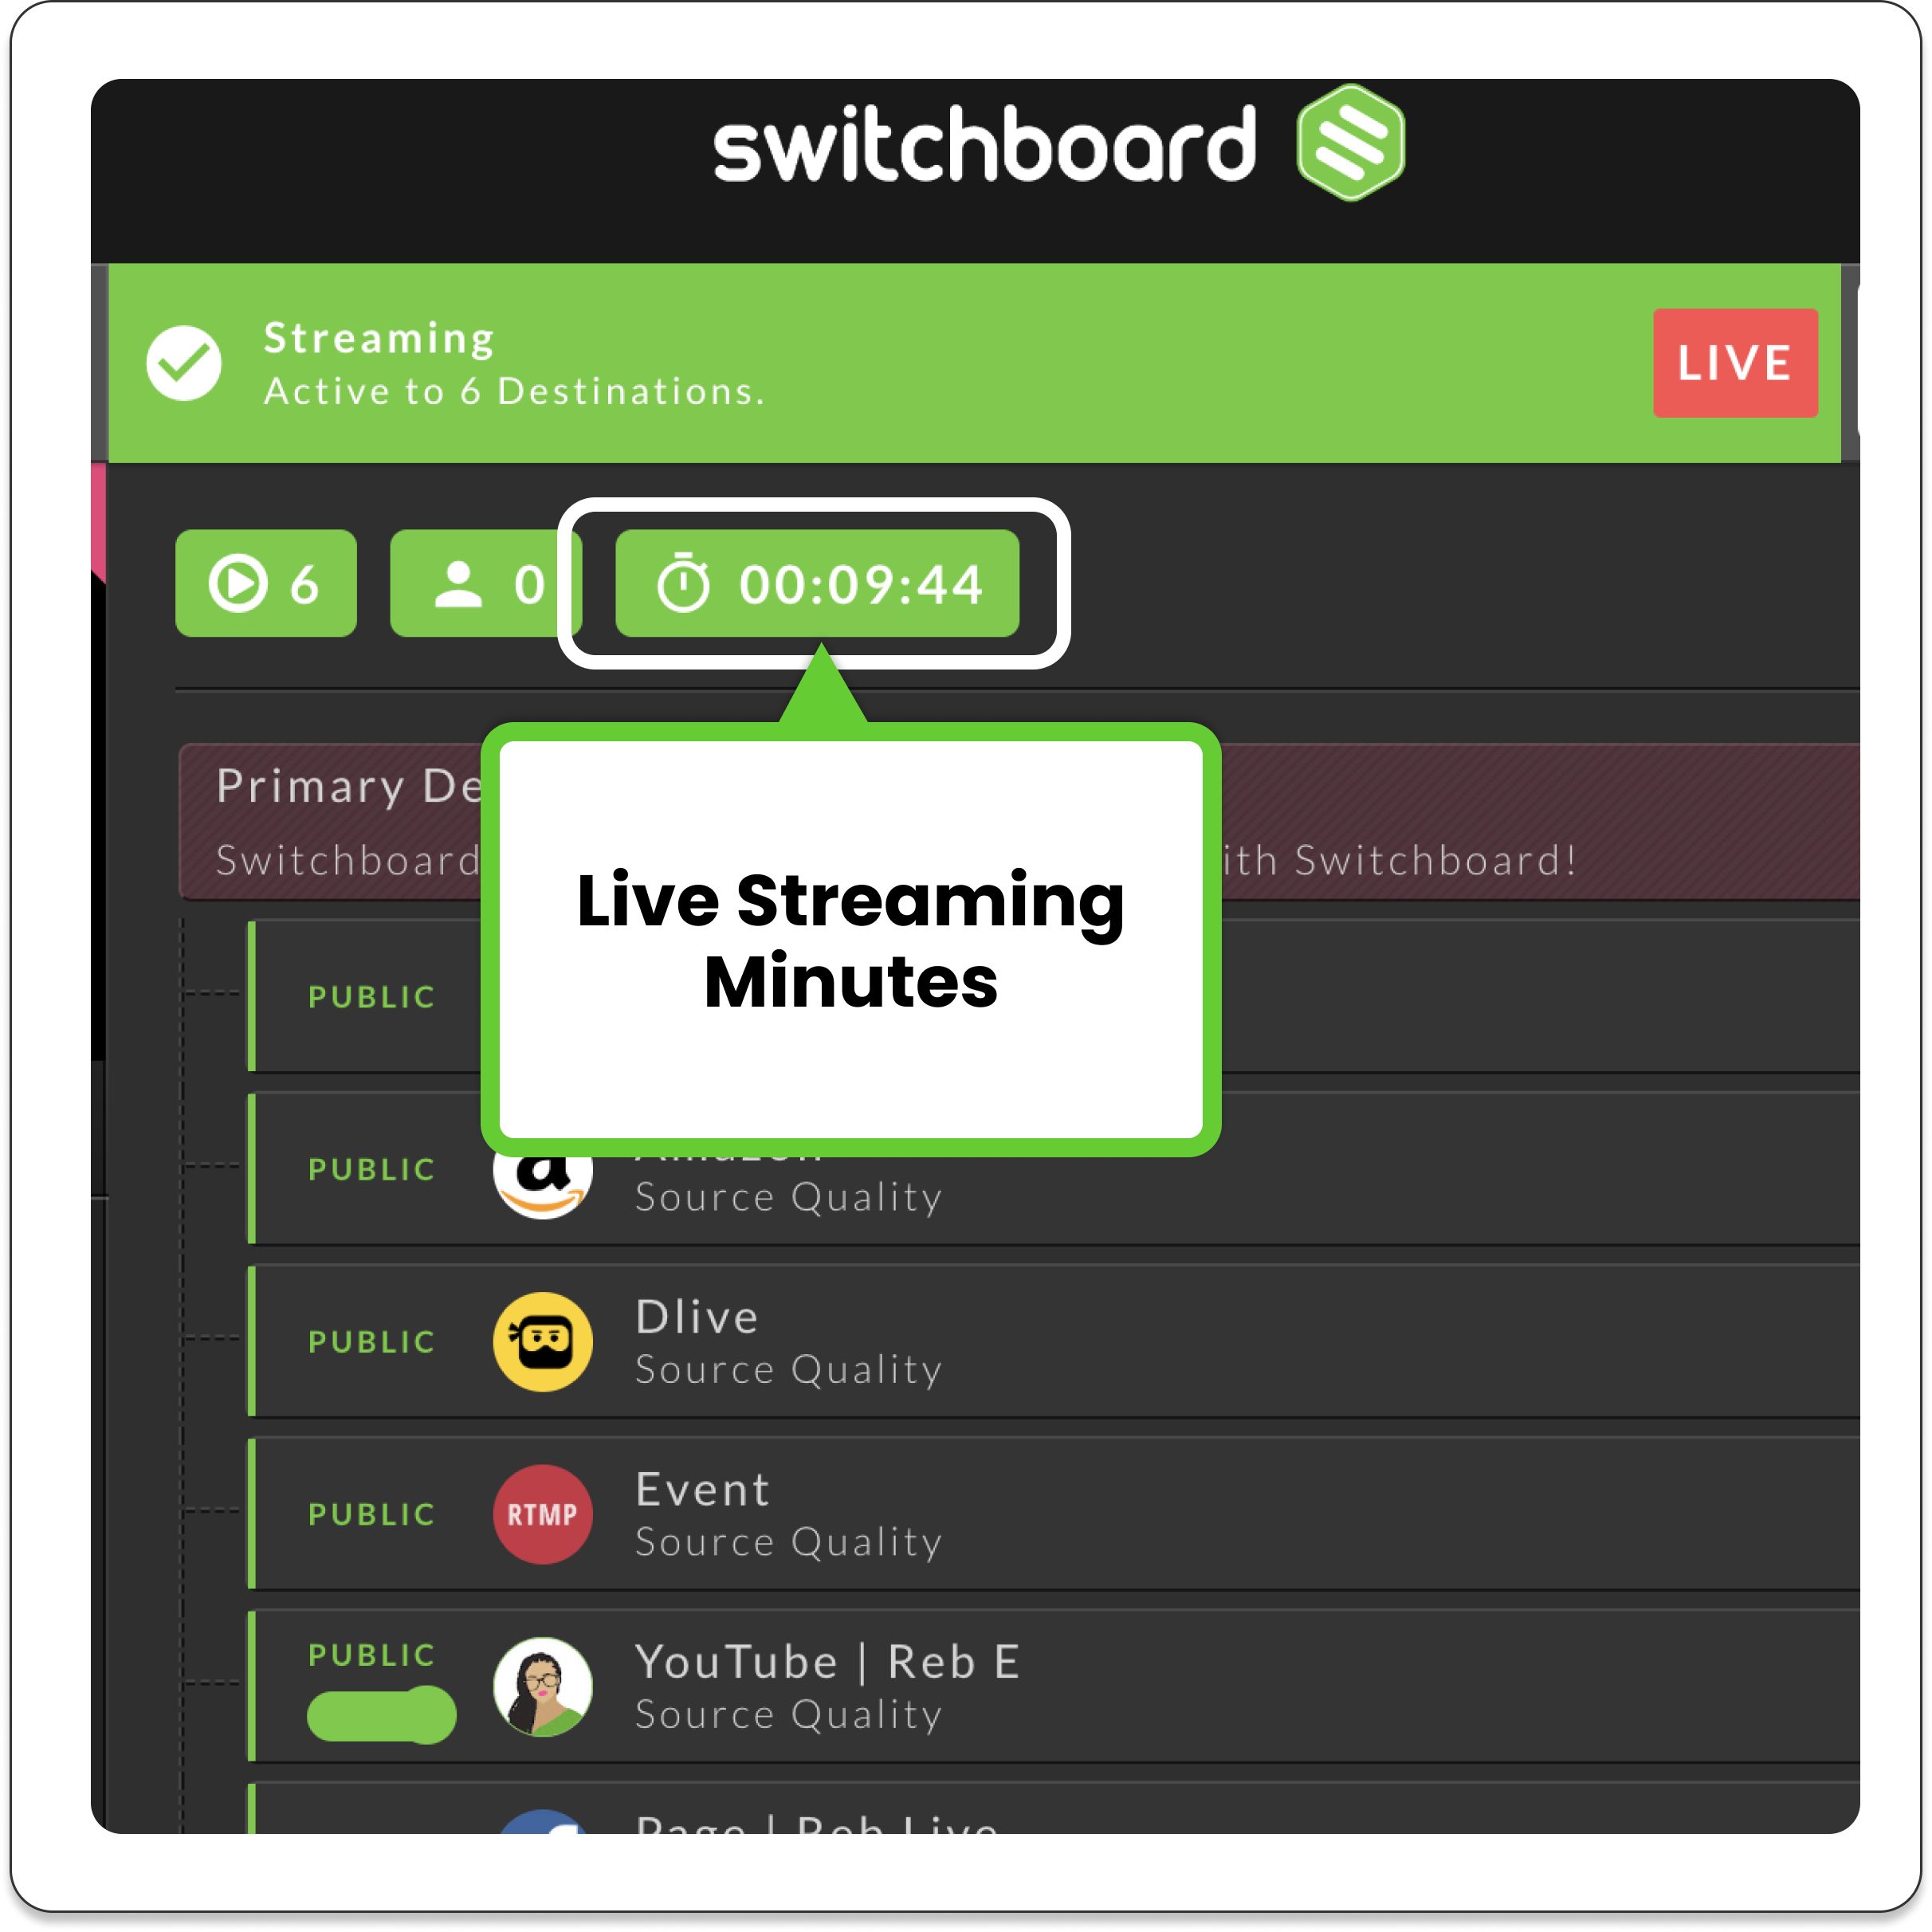 switchboardlive_workflow-page_destinations_pane_Livestreamingminutes.png